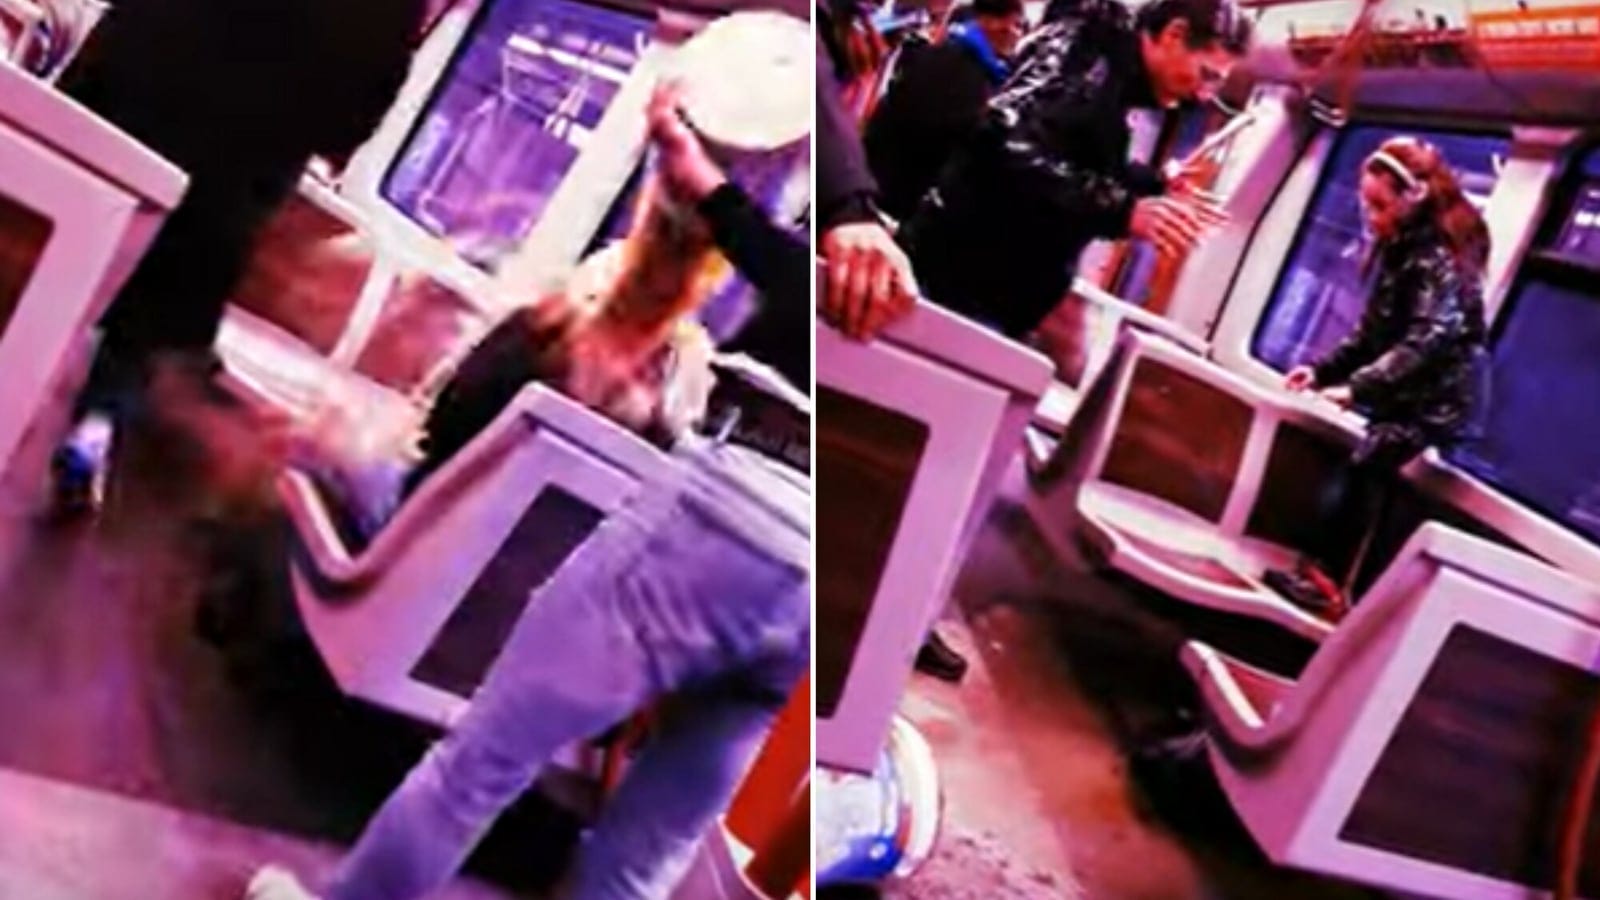 Brussels YouTuber pranks metro travellers by pouring dog muck on them, gets arrested